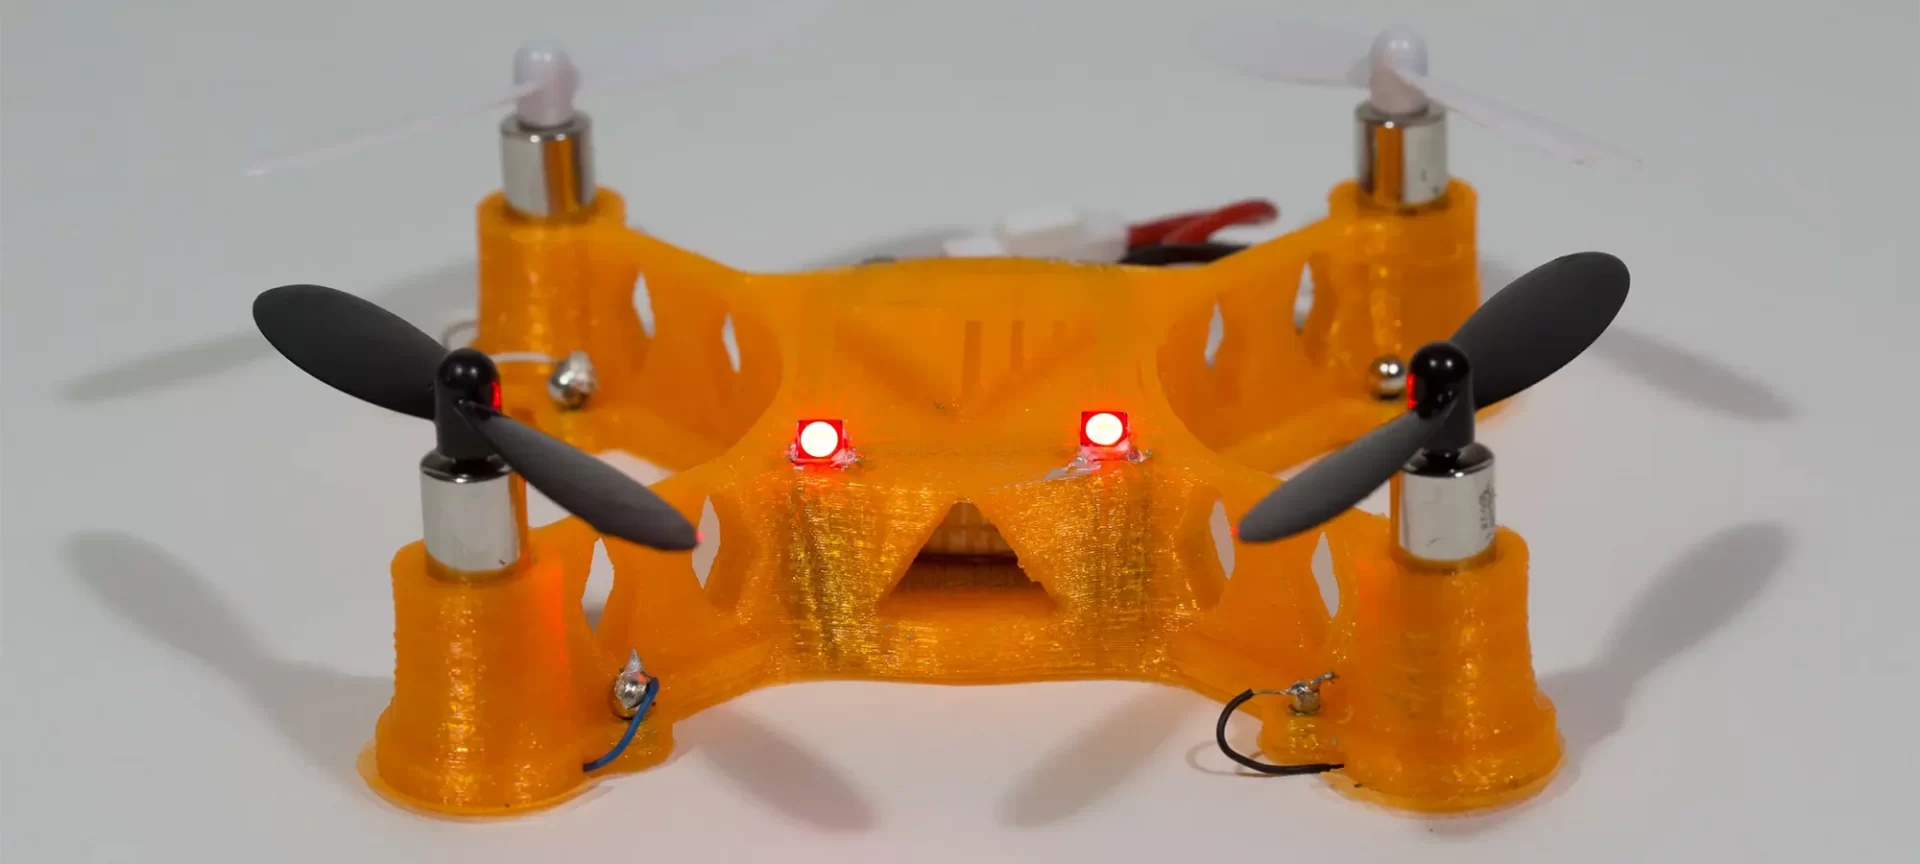 3D printed drone